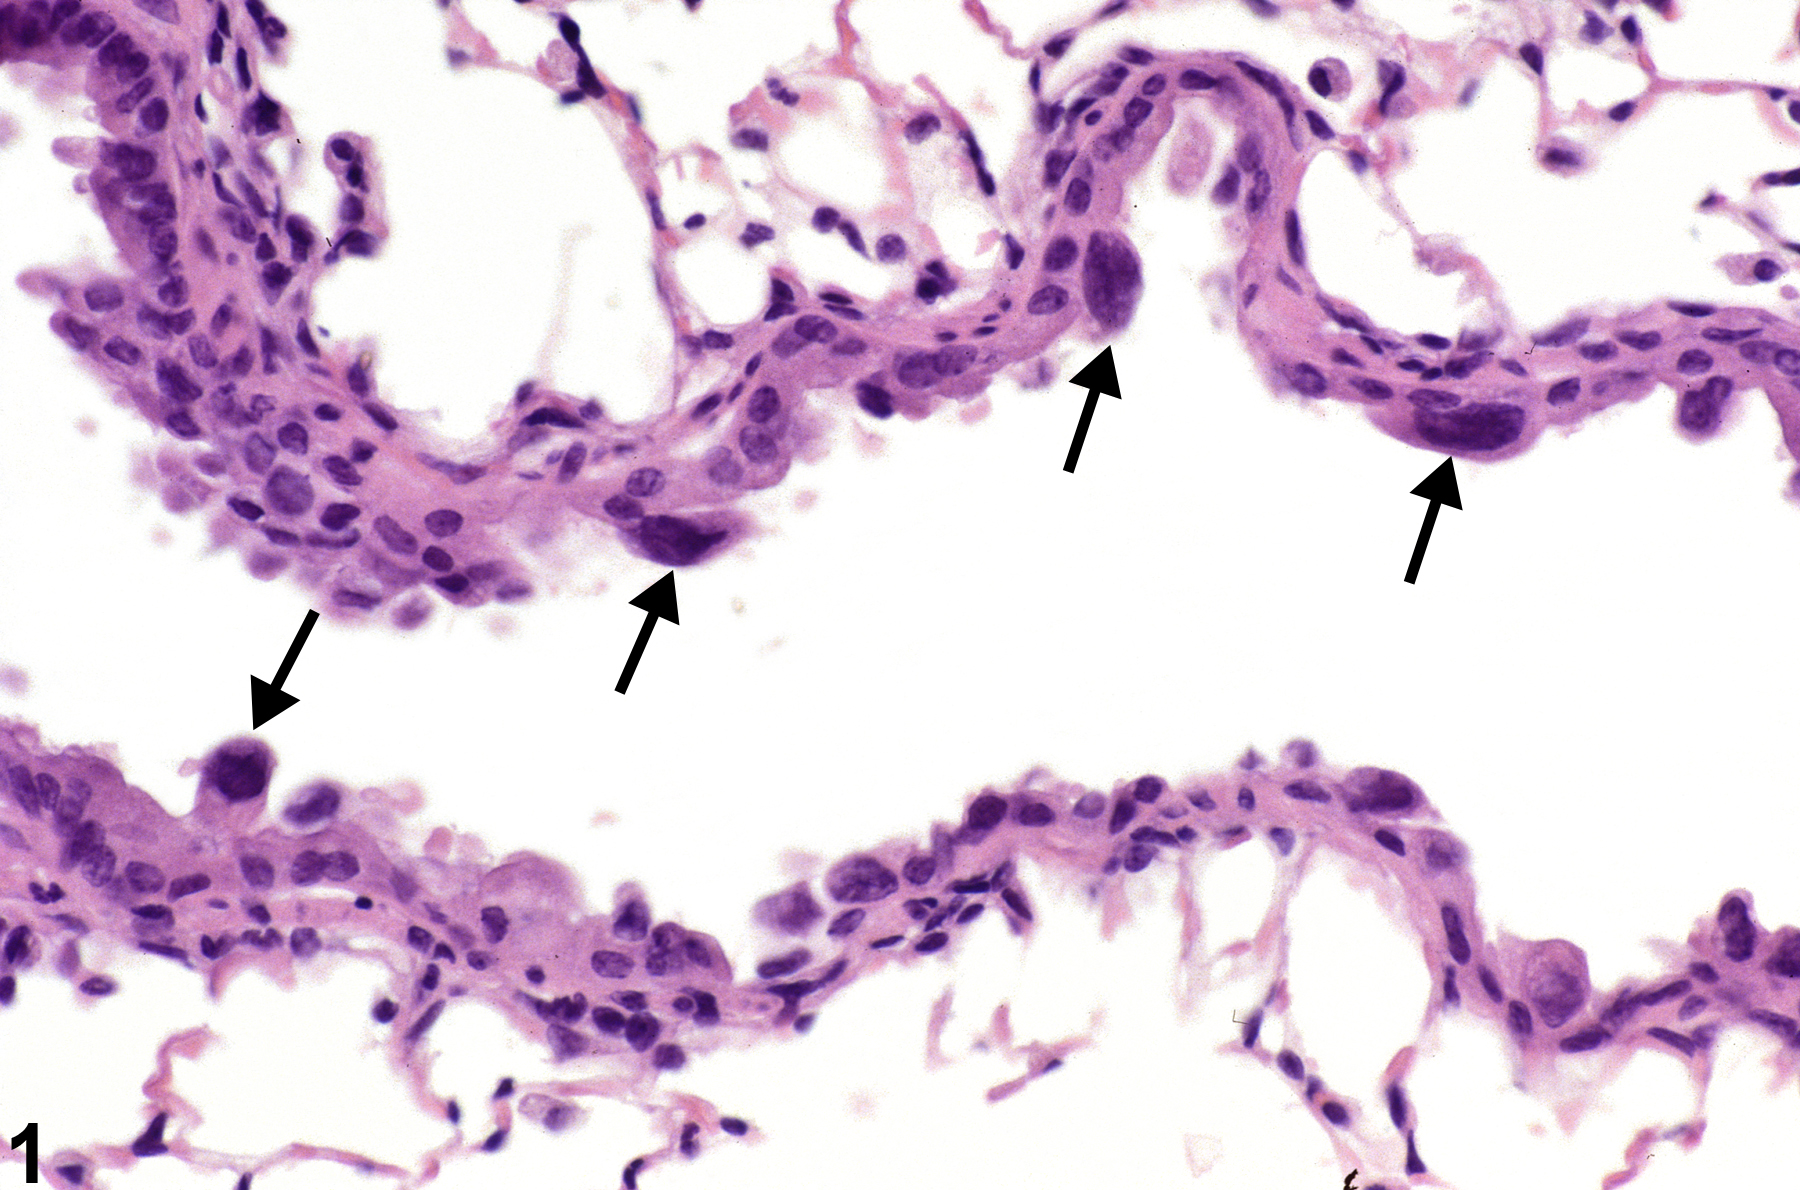 Image of atypia, cellular in the lung from a female B6C3F1/N mouse in a subchronic study